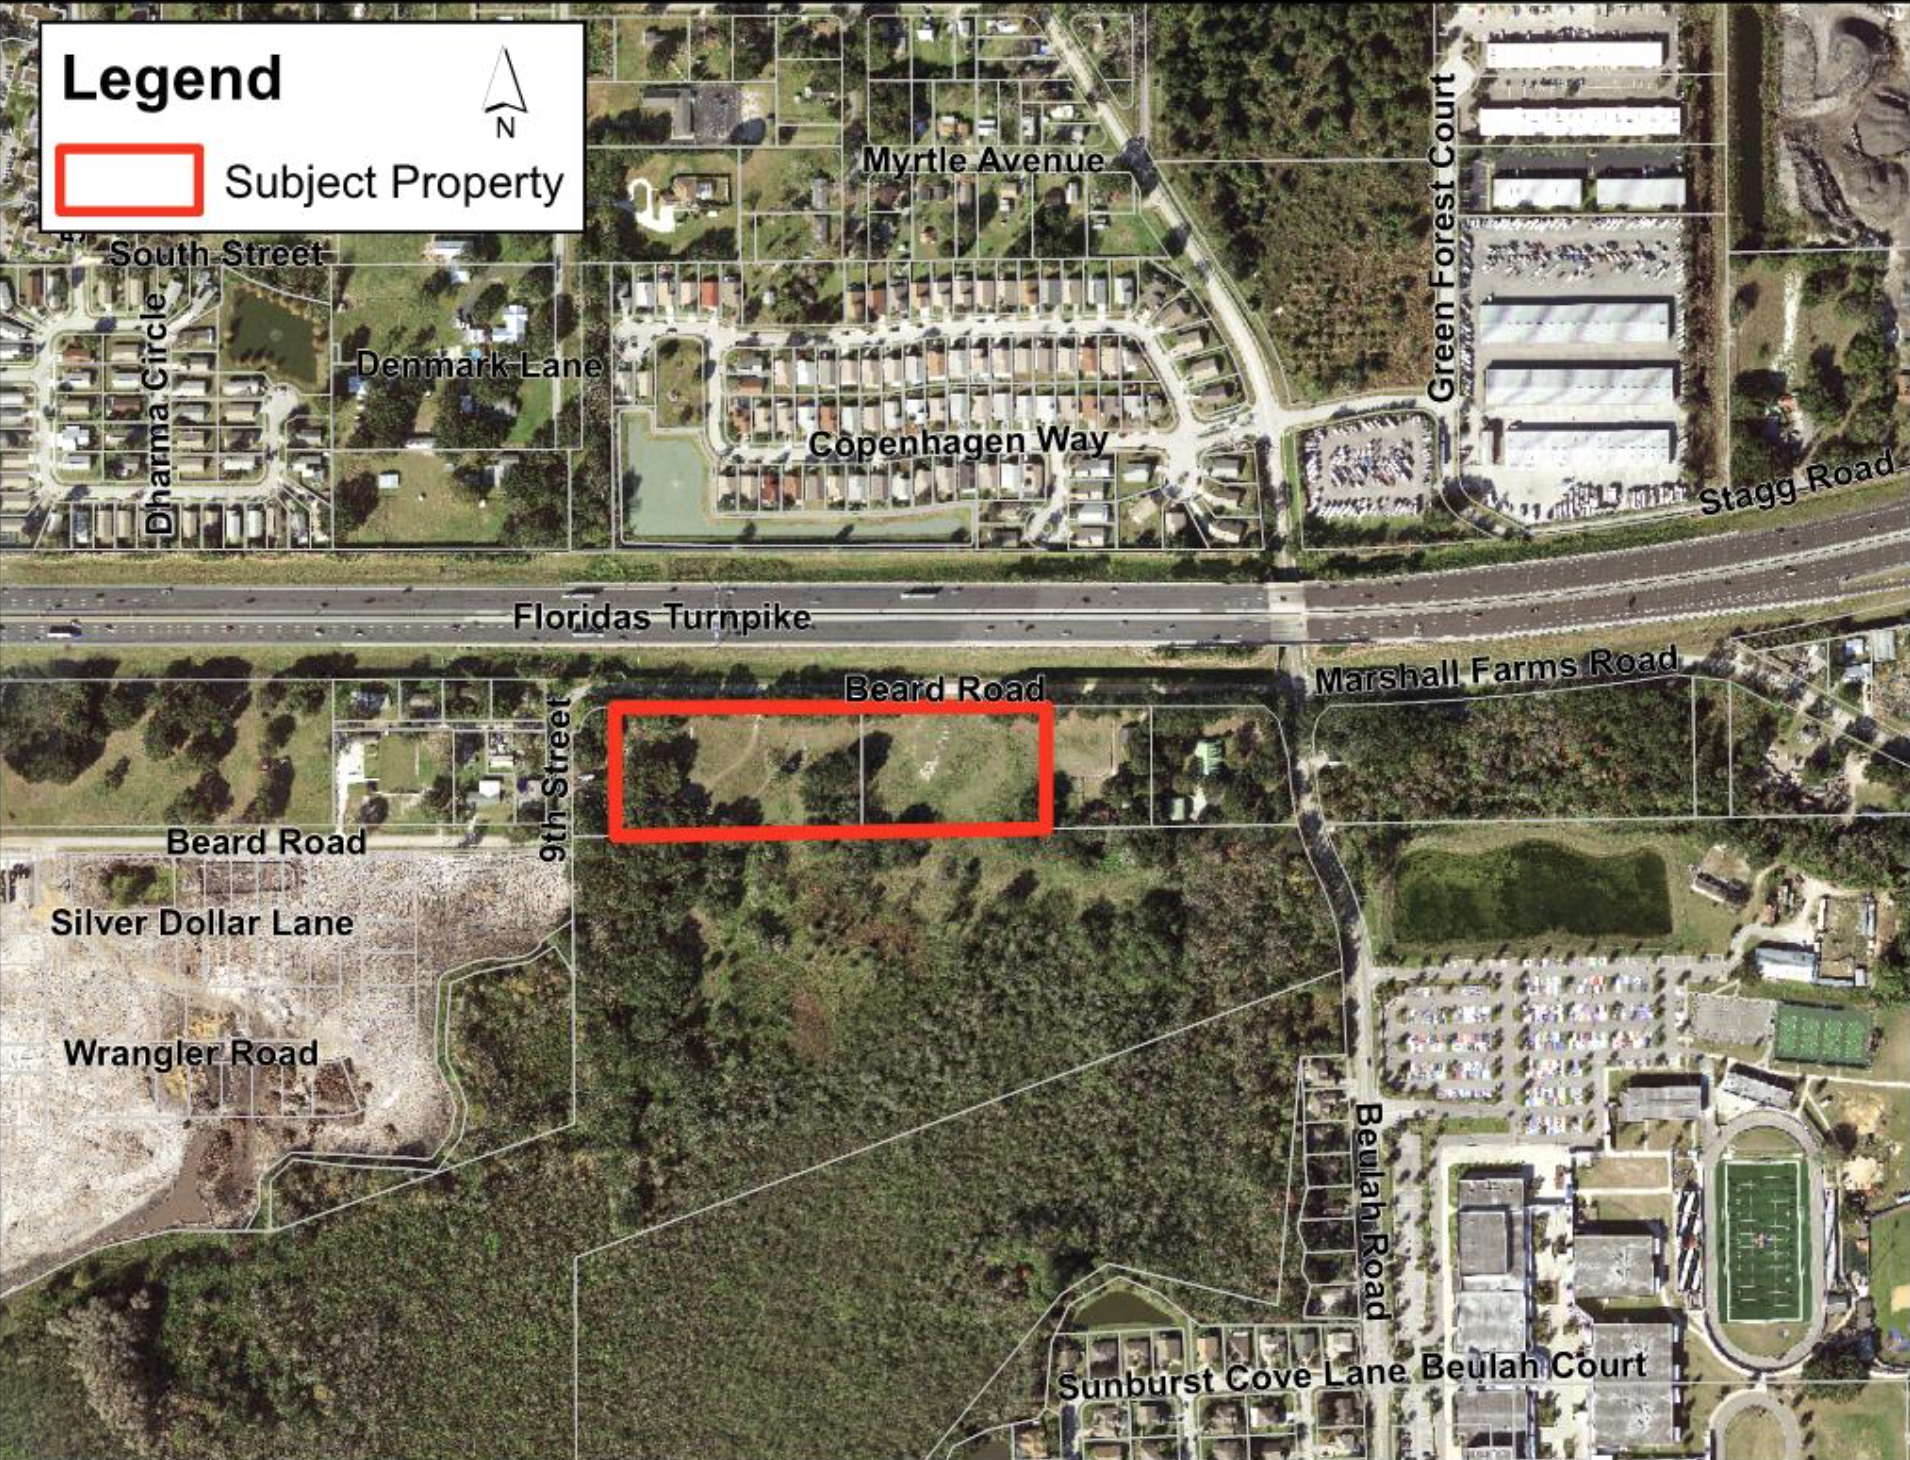 The storage facility will be located on roughly six acres off of Beard Road, right across from Florida’s Turnpike. (Courtesy)